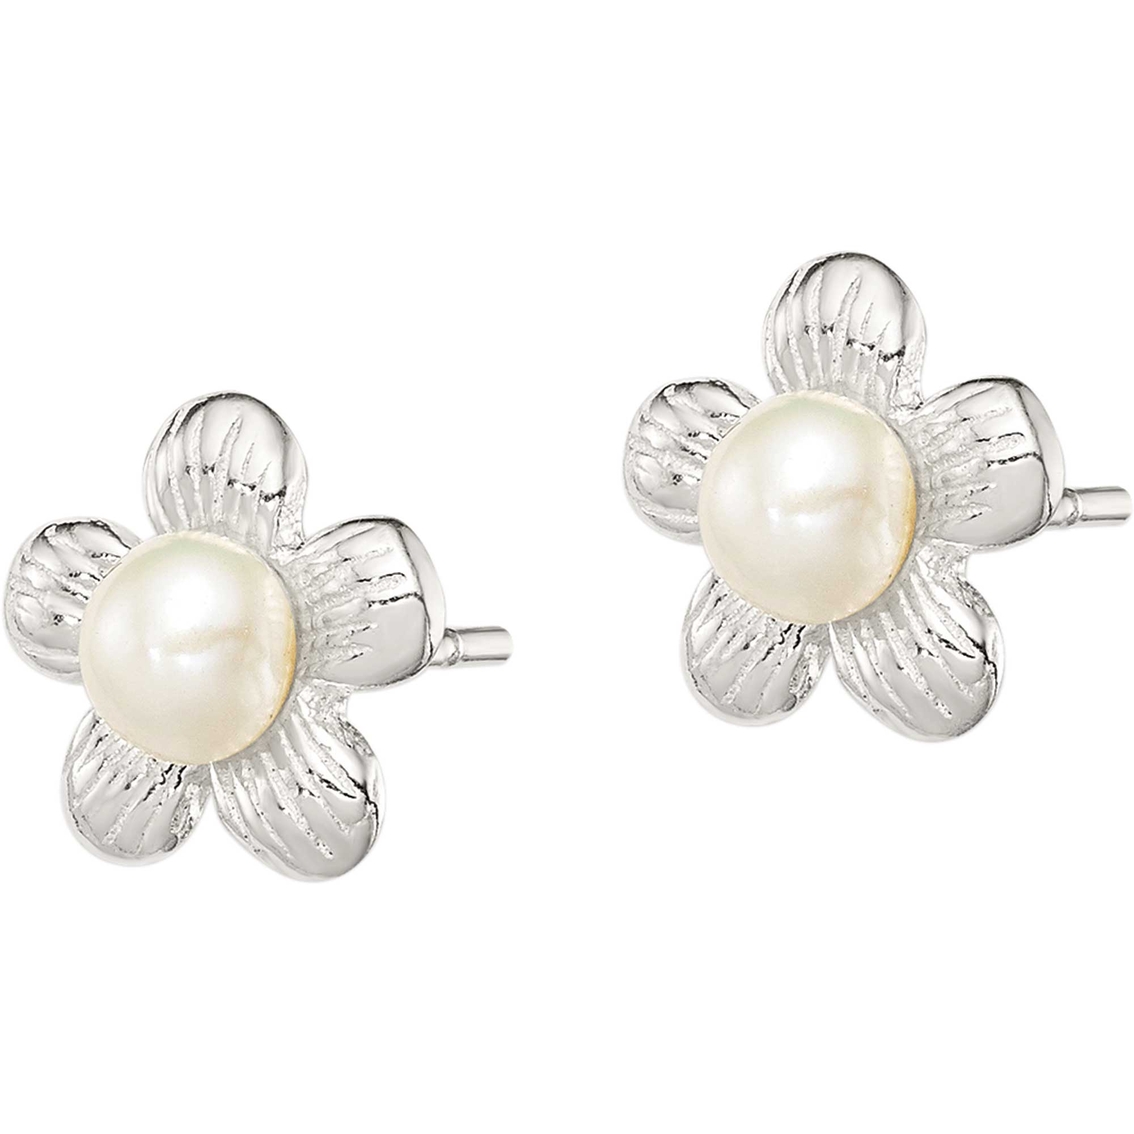 Sterling Silver Flower and Simulated Pearl Post Earrings - Image 2 of 2